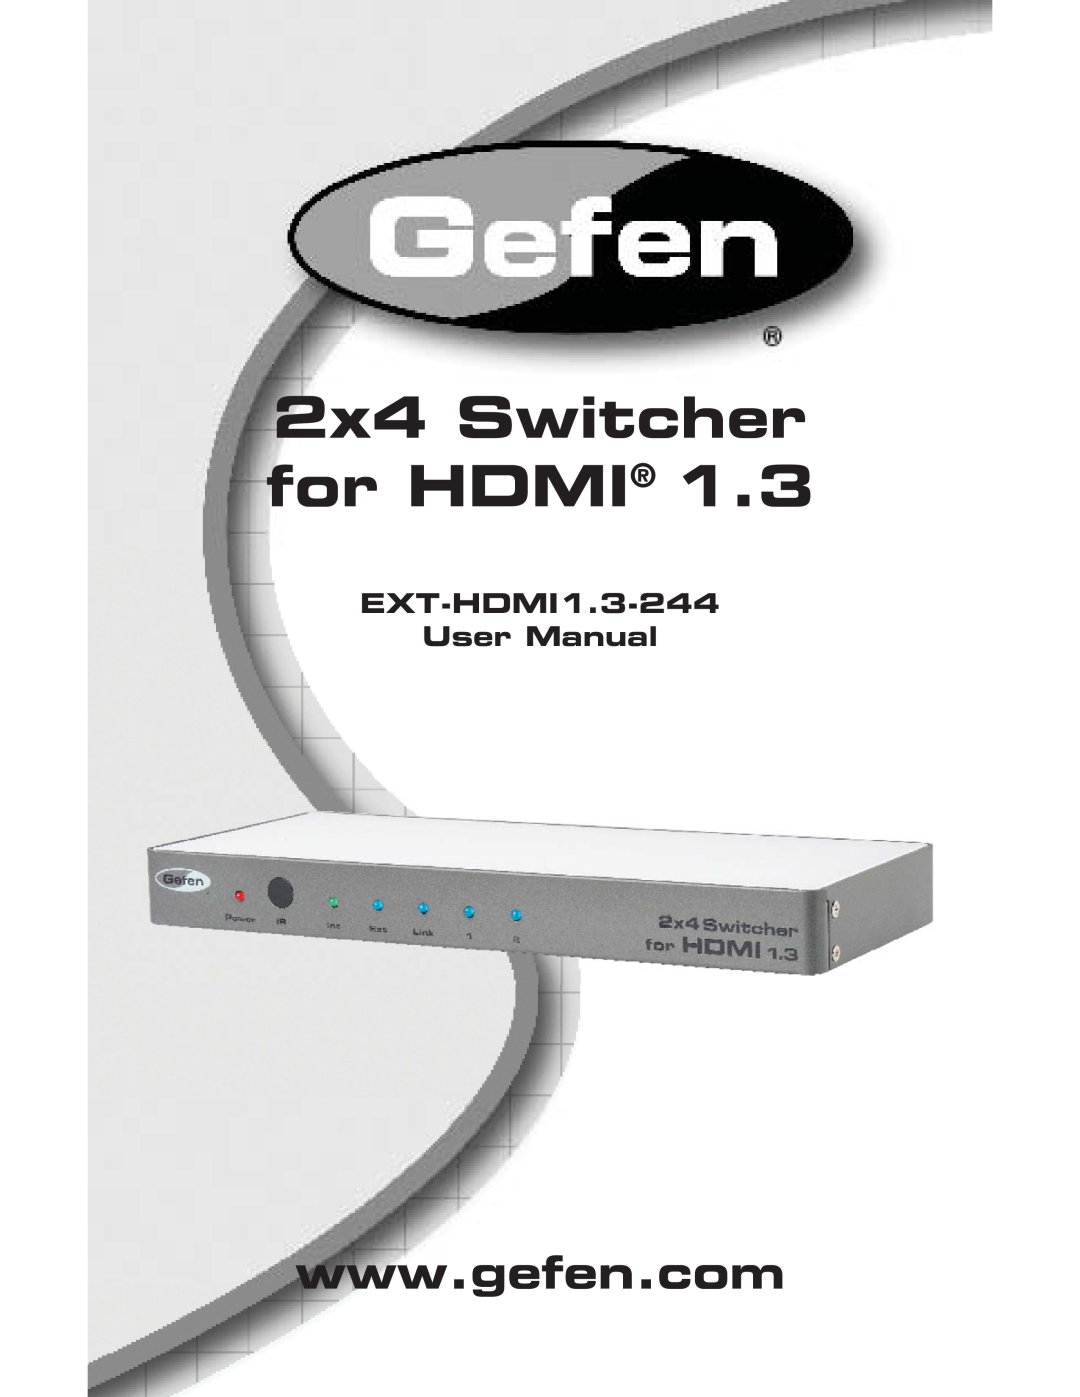 Gefen user manual 2x4 Switcher for HDMI, EXT-HDMI1.3-244 User Manual 